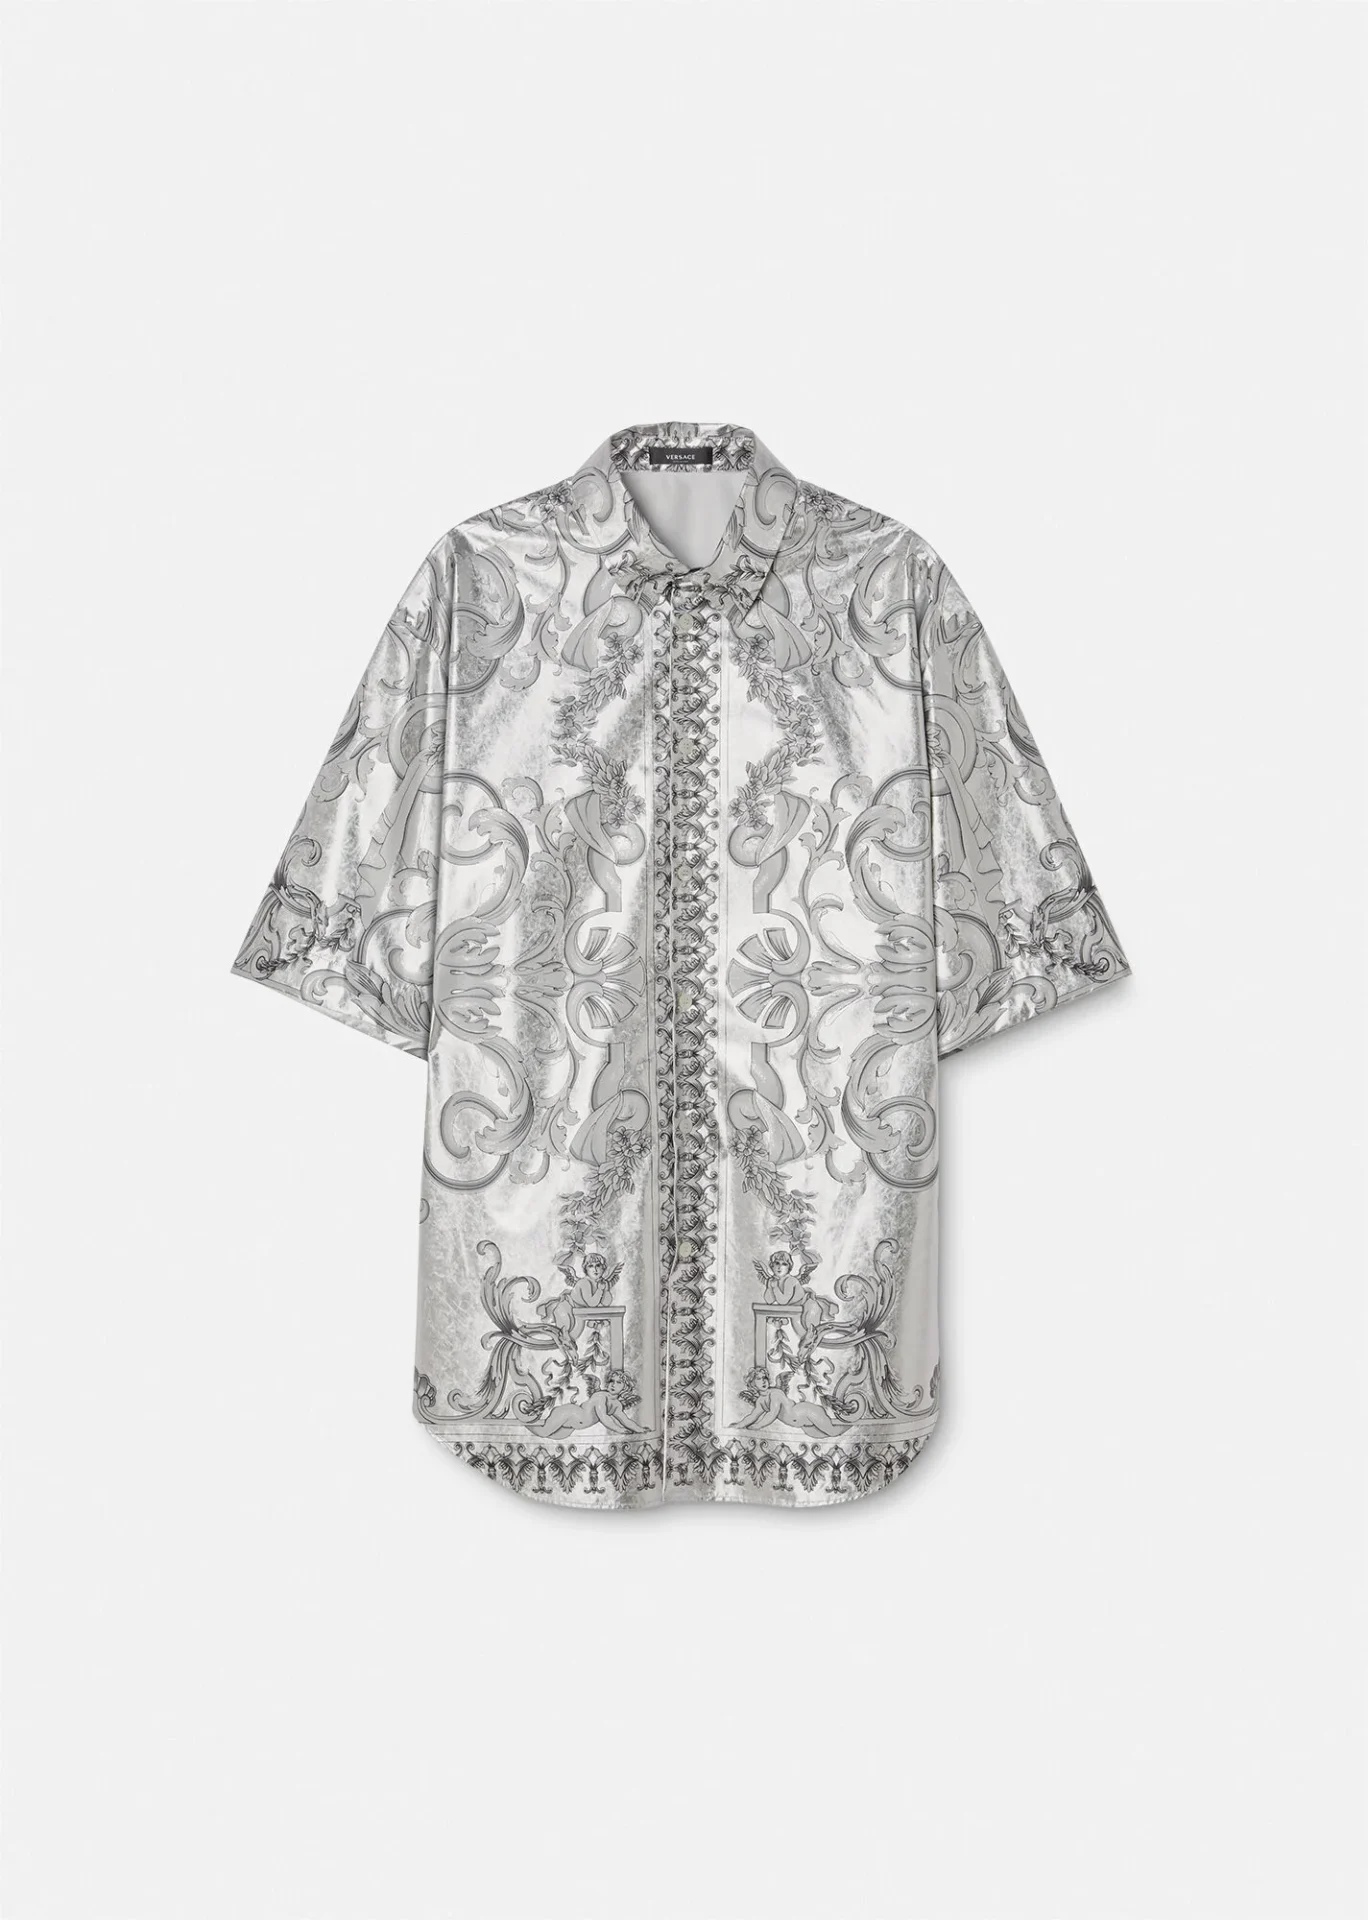 A silver versace silk shirt with floral patterns